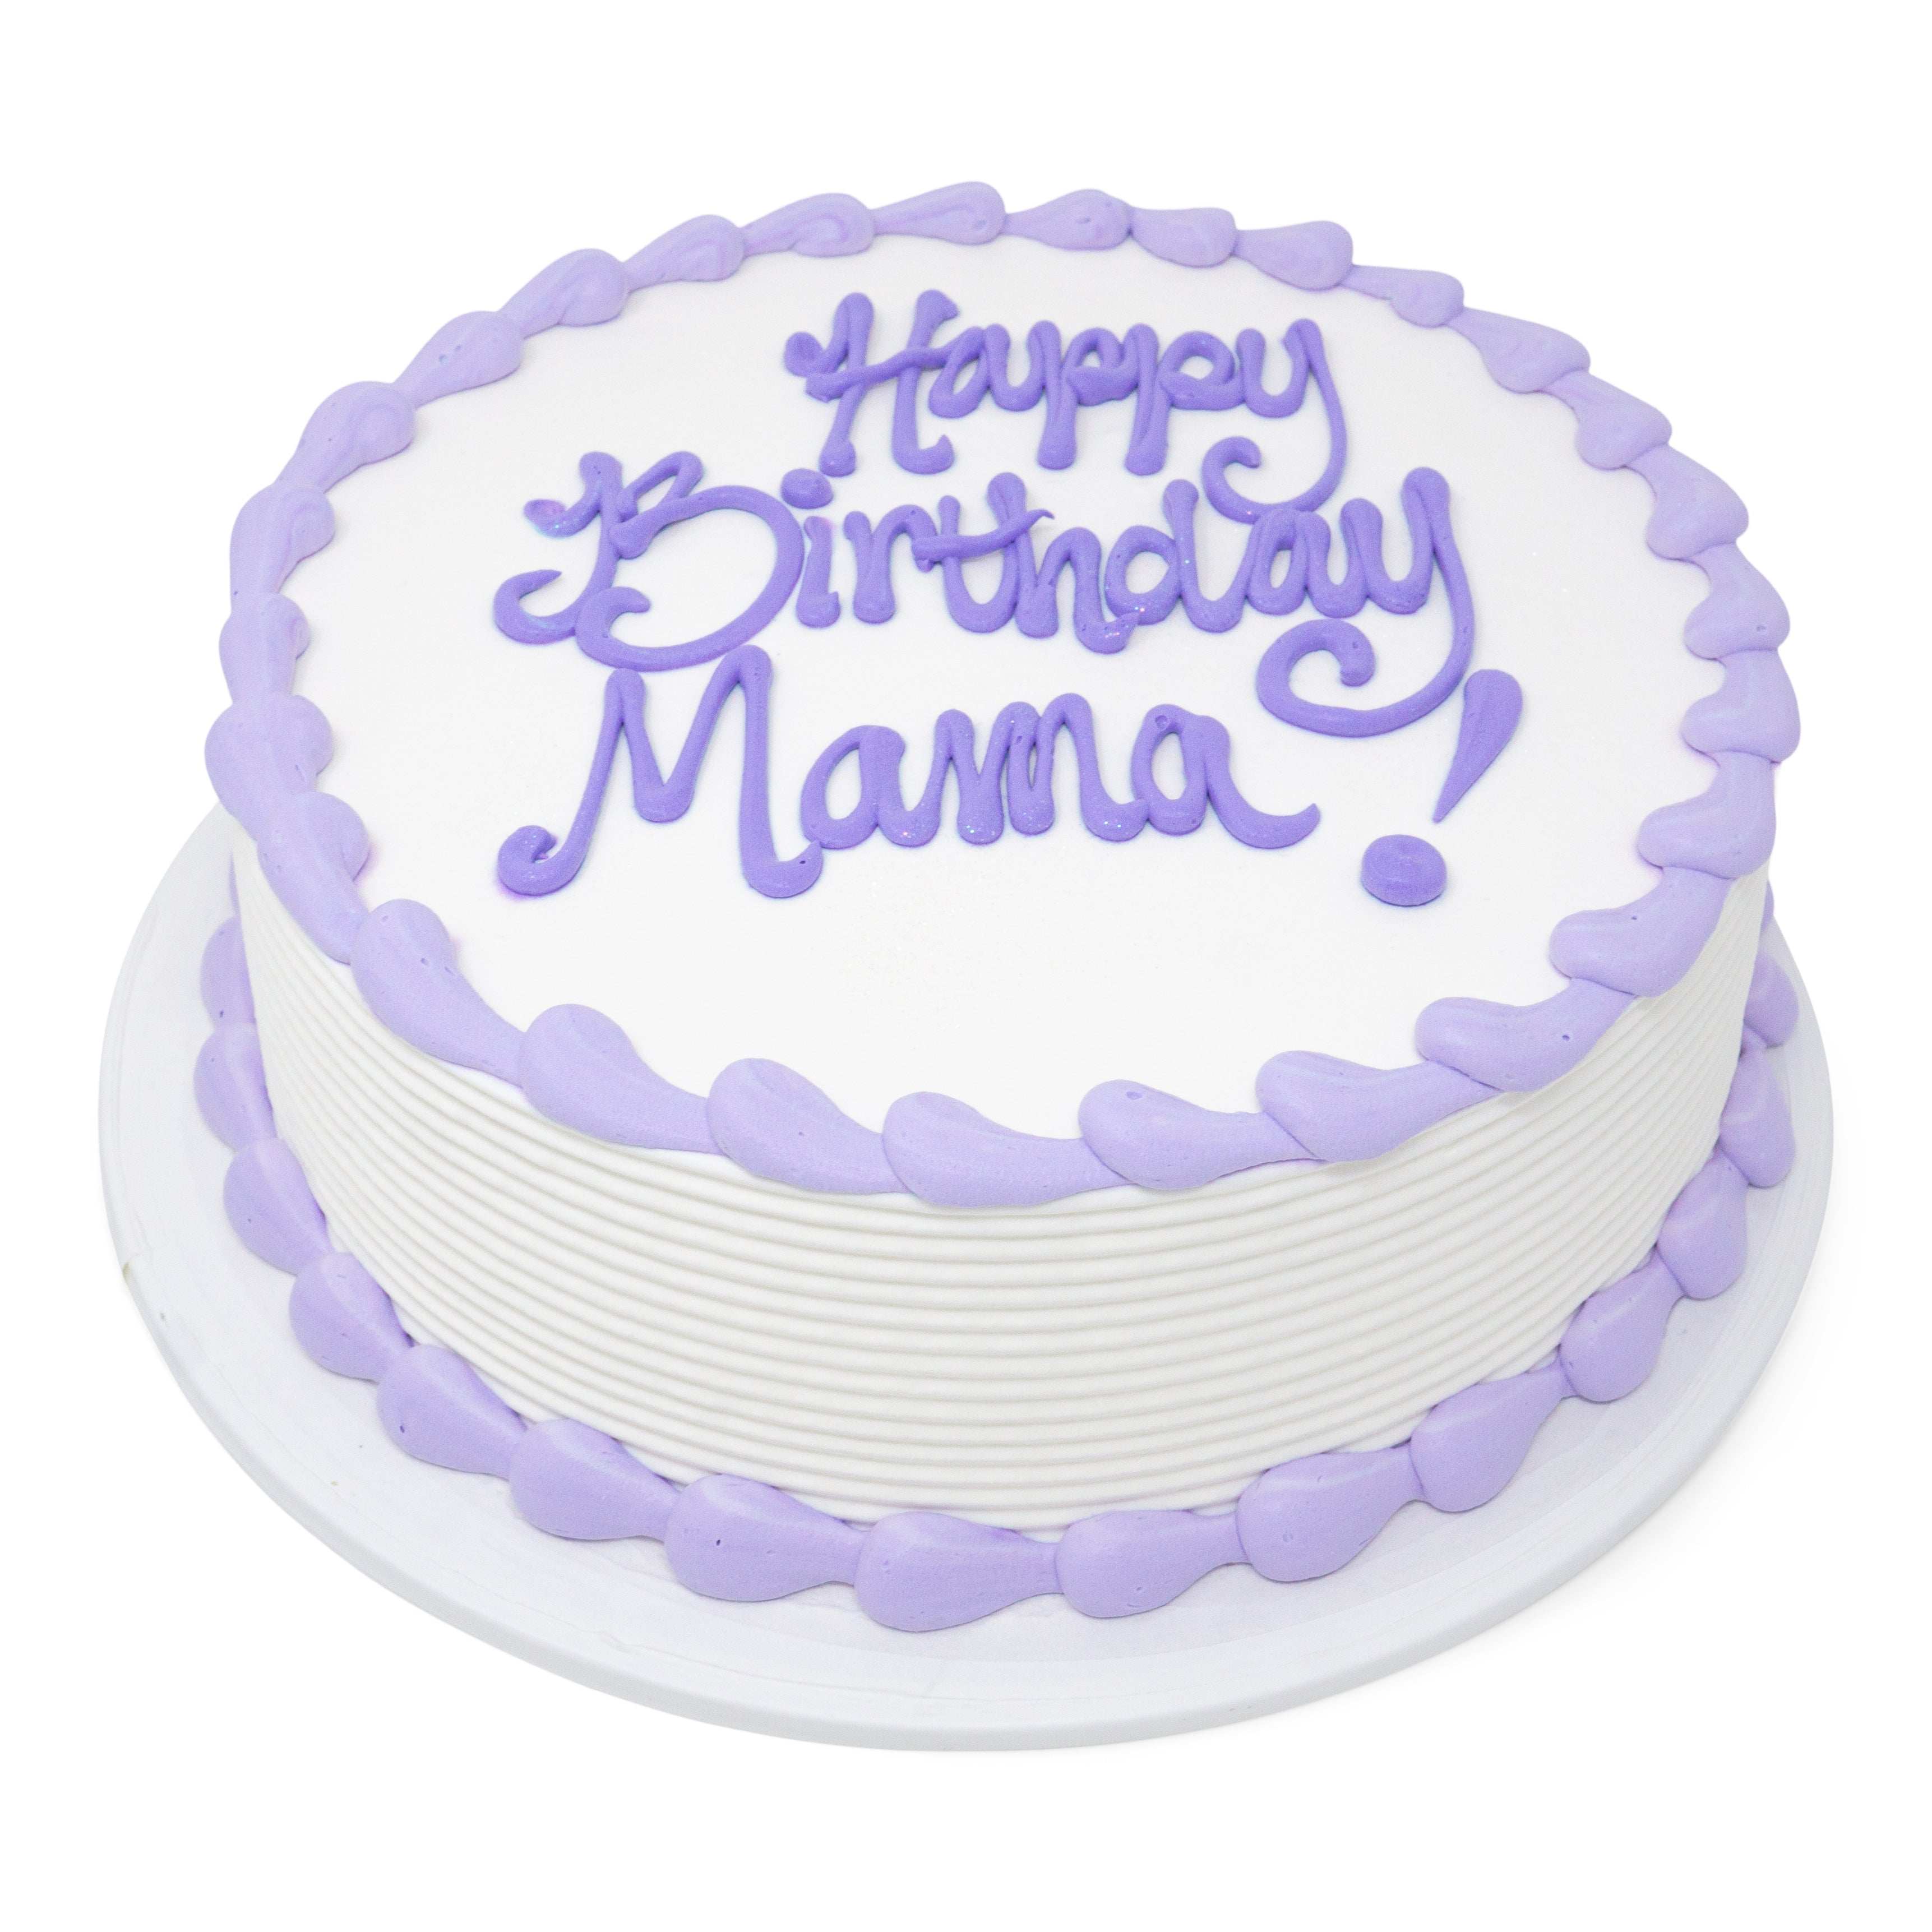 Happy Mothers Day Cake Topper Mama Cake Topper Acrylic Mirror Cake Topper  Decorative Party Cake Decoration For Mothers Day(Circle Rose Gold) -  Walmart.com